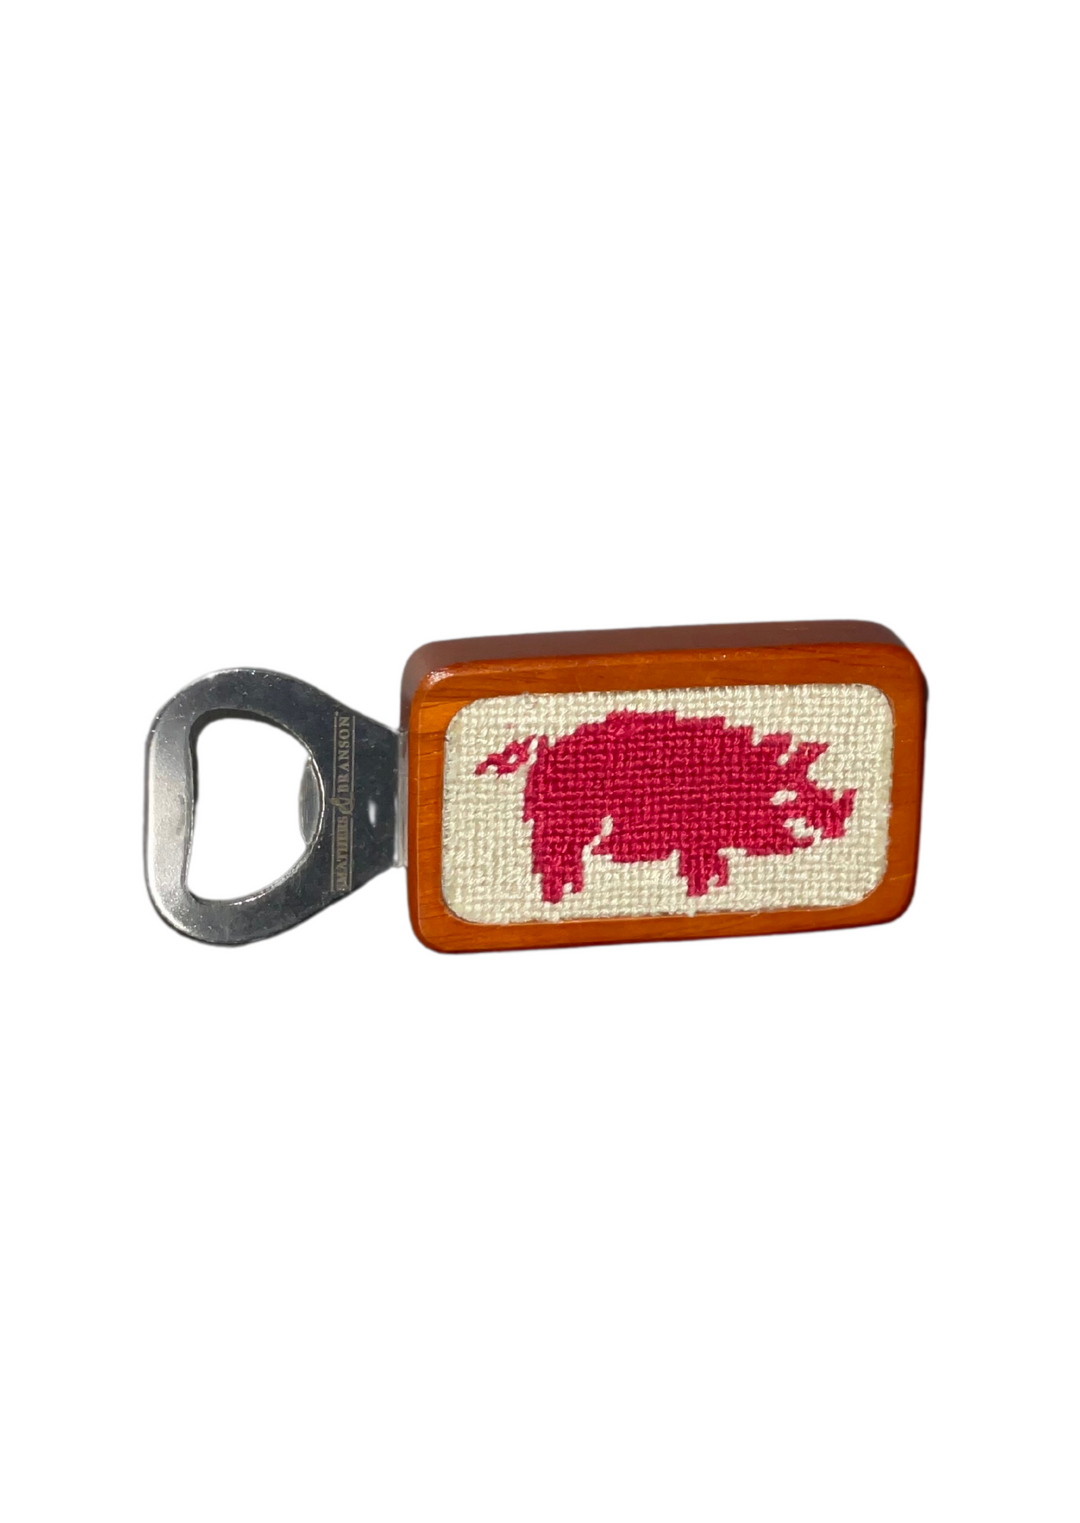 Needlepoint Curly Tail Bottle Opener